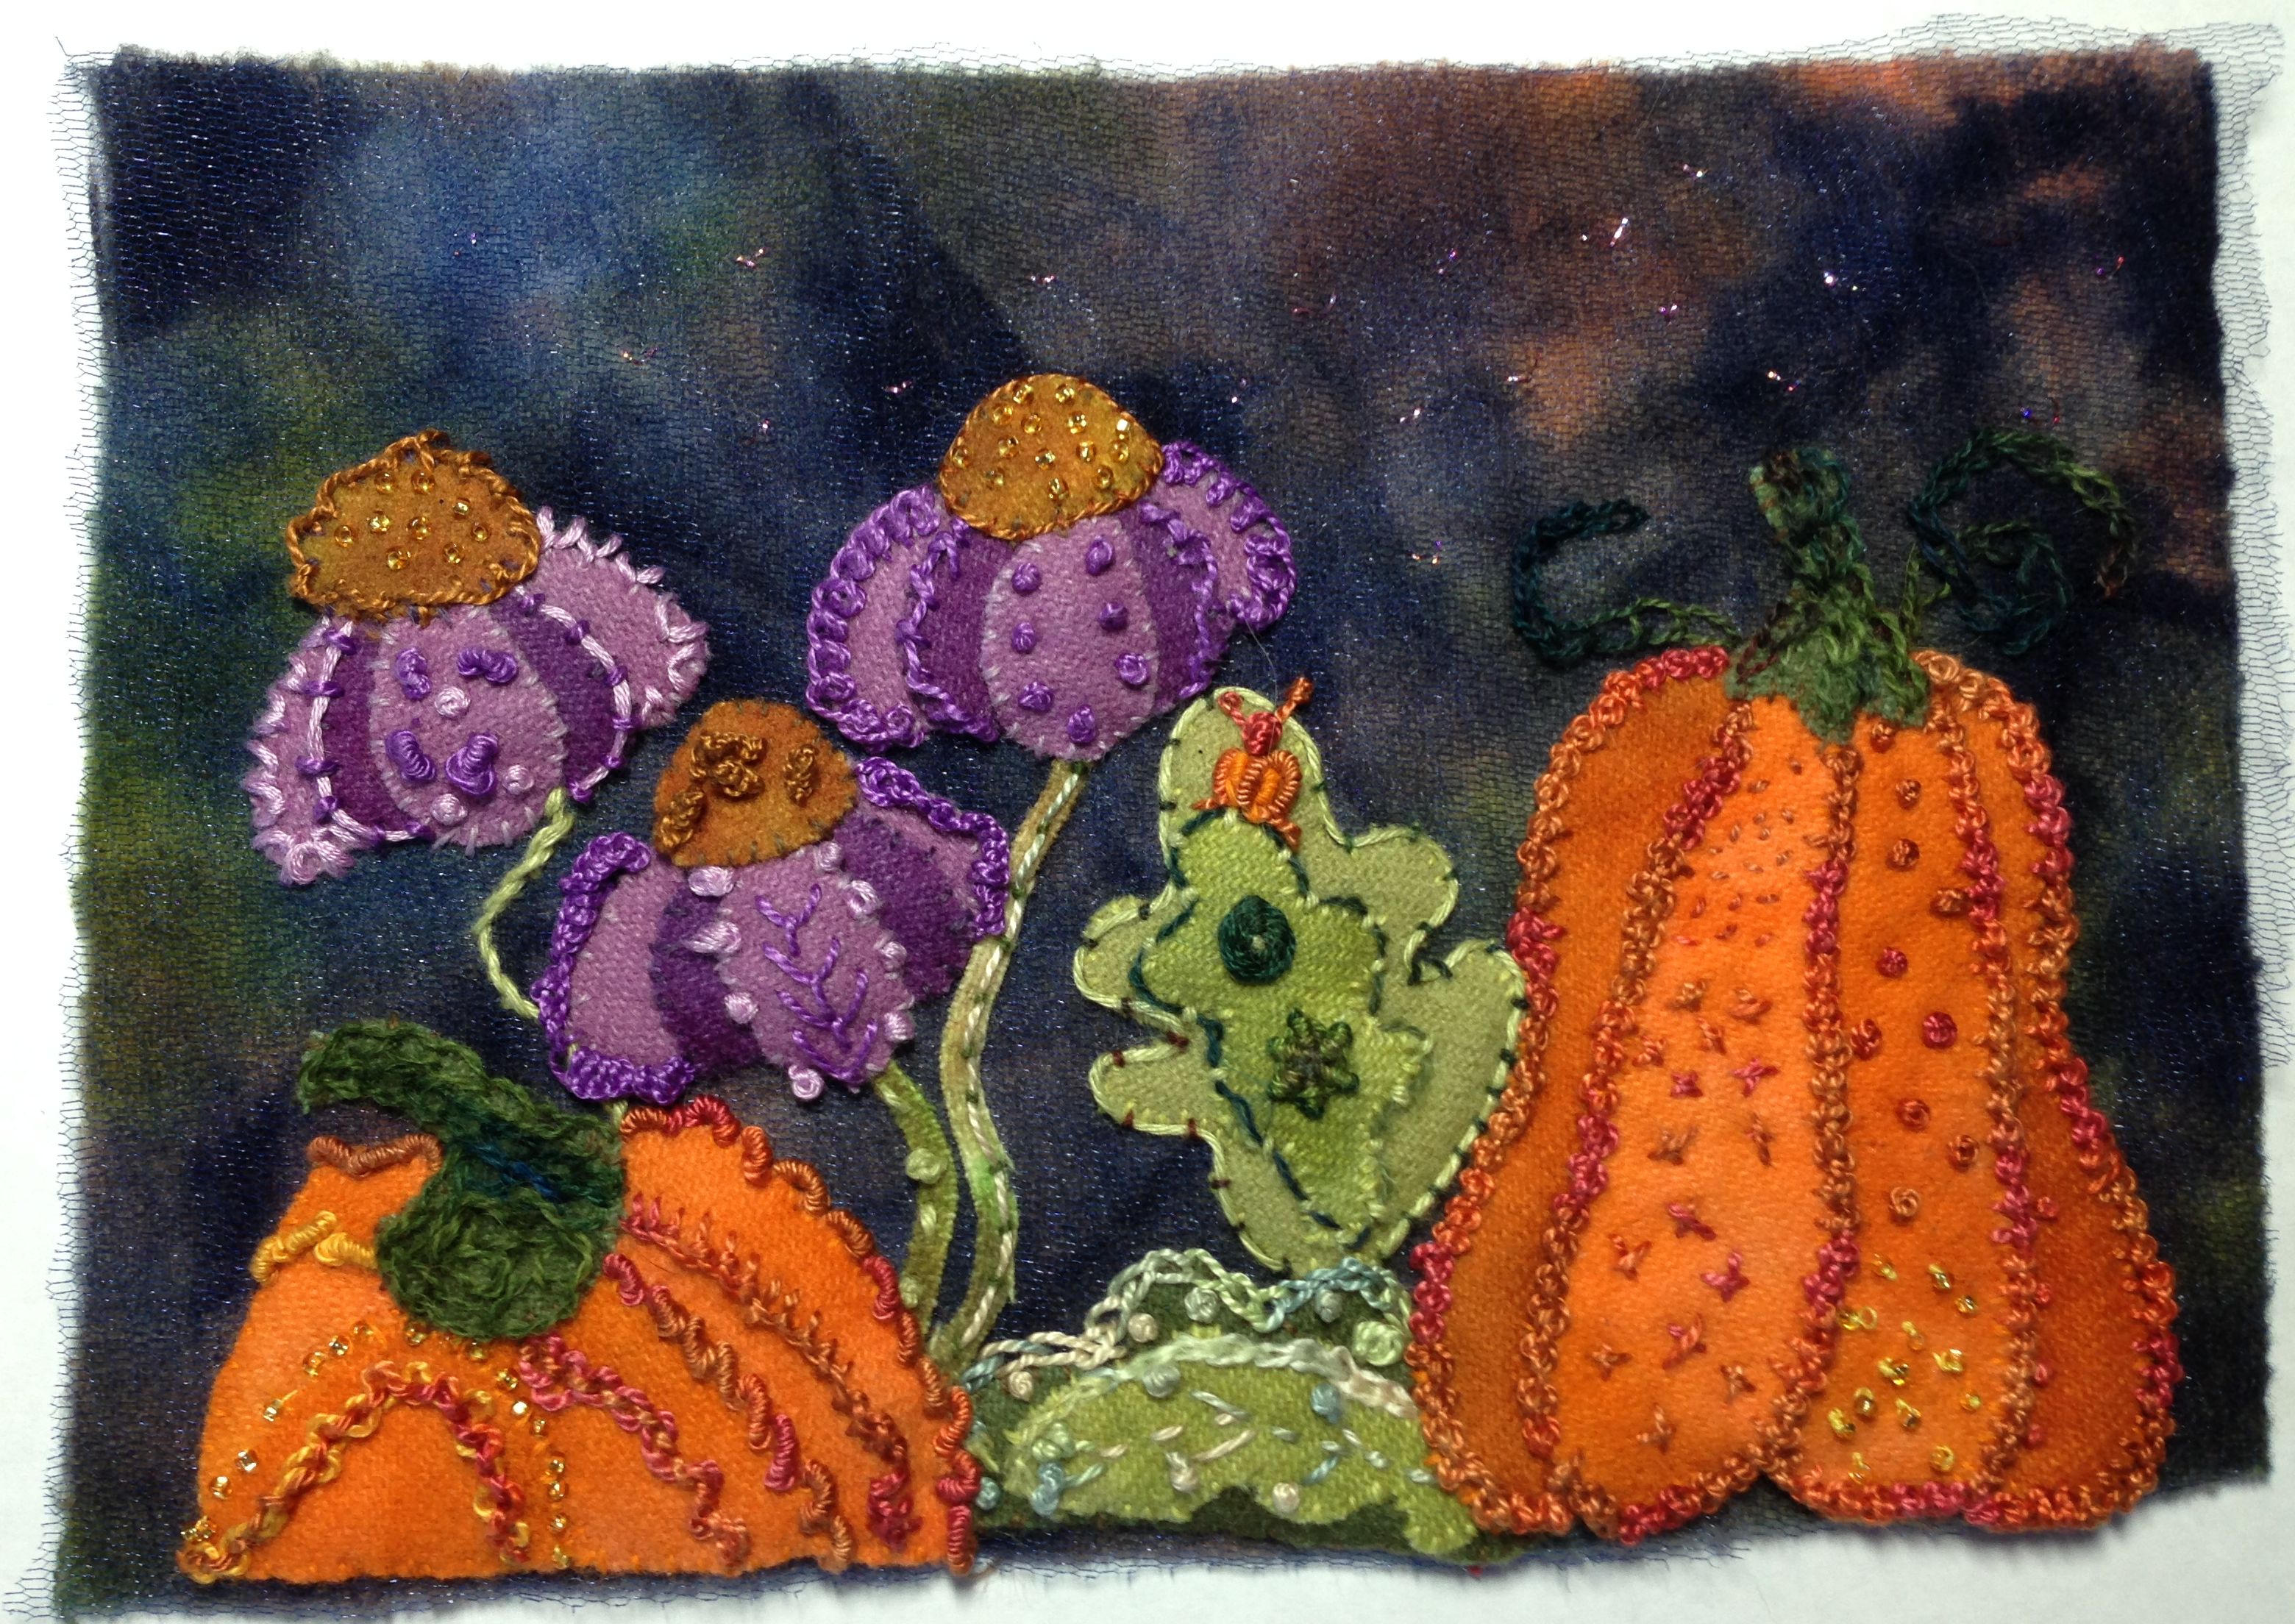 Wool Applique’ – a new art for me!